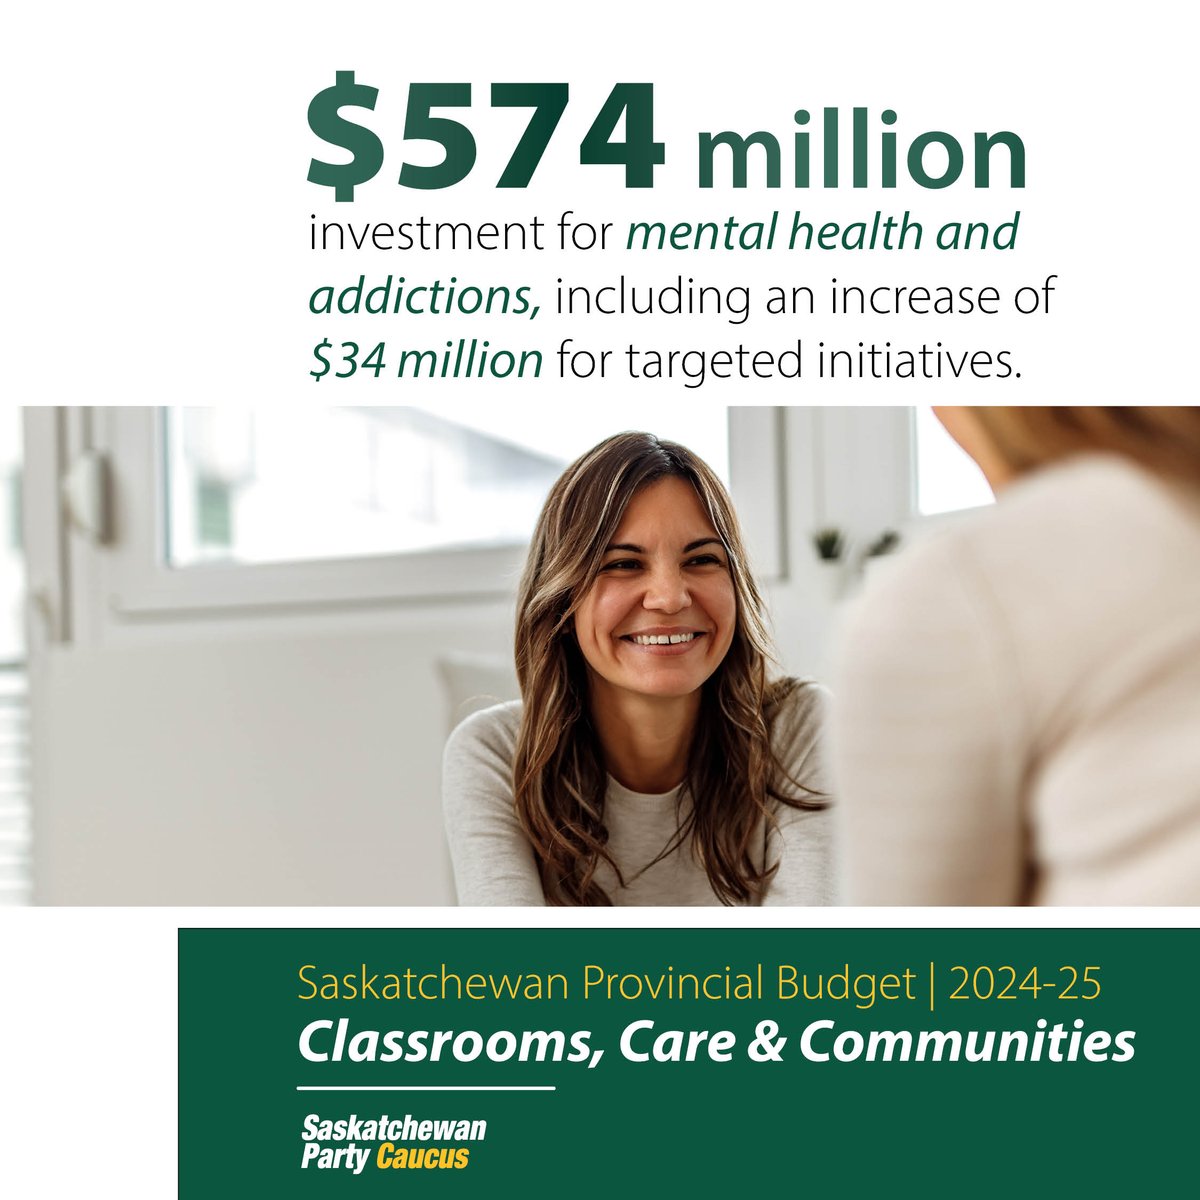 This budget invests in expanding services and improving mental health and addictions care for Saskatchewan people as well as hospital-based services, physician visits and prescription drug costs.